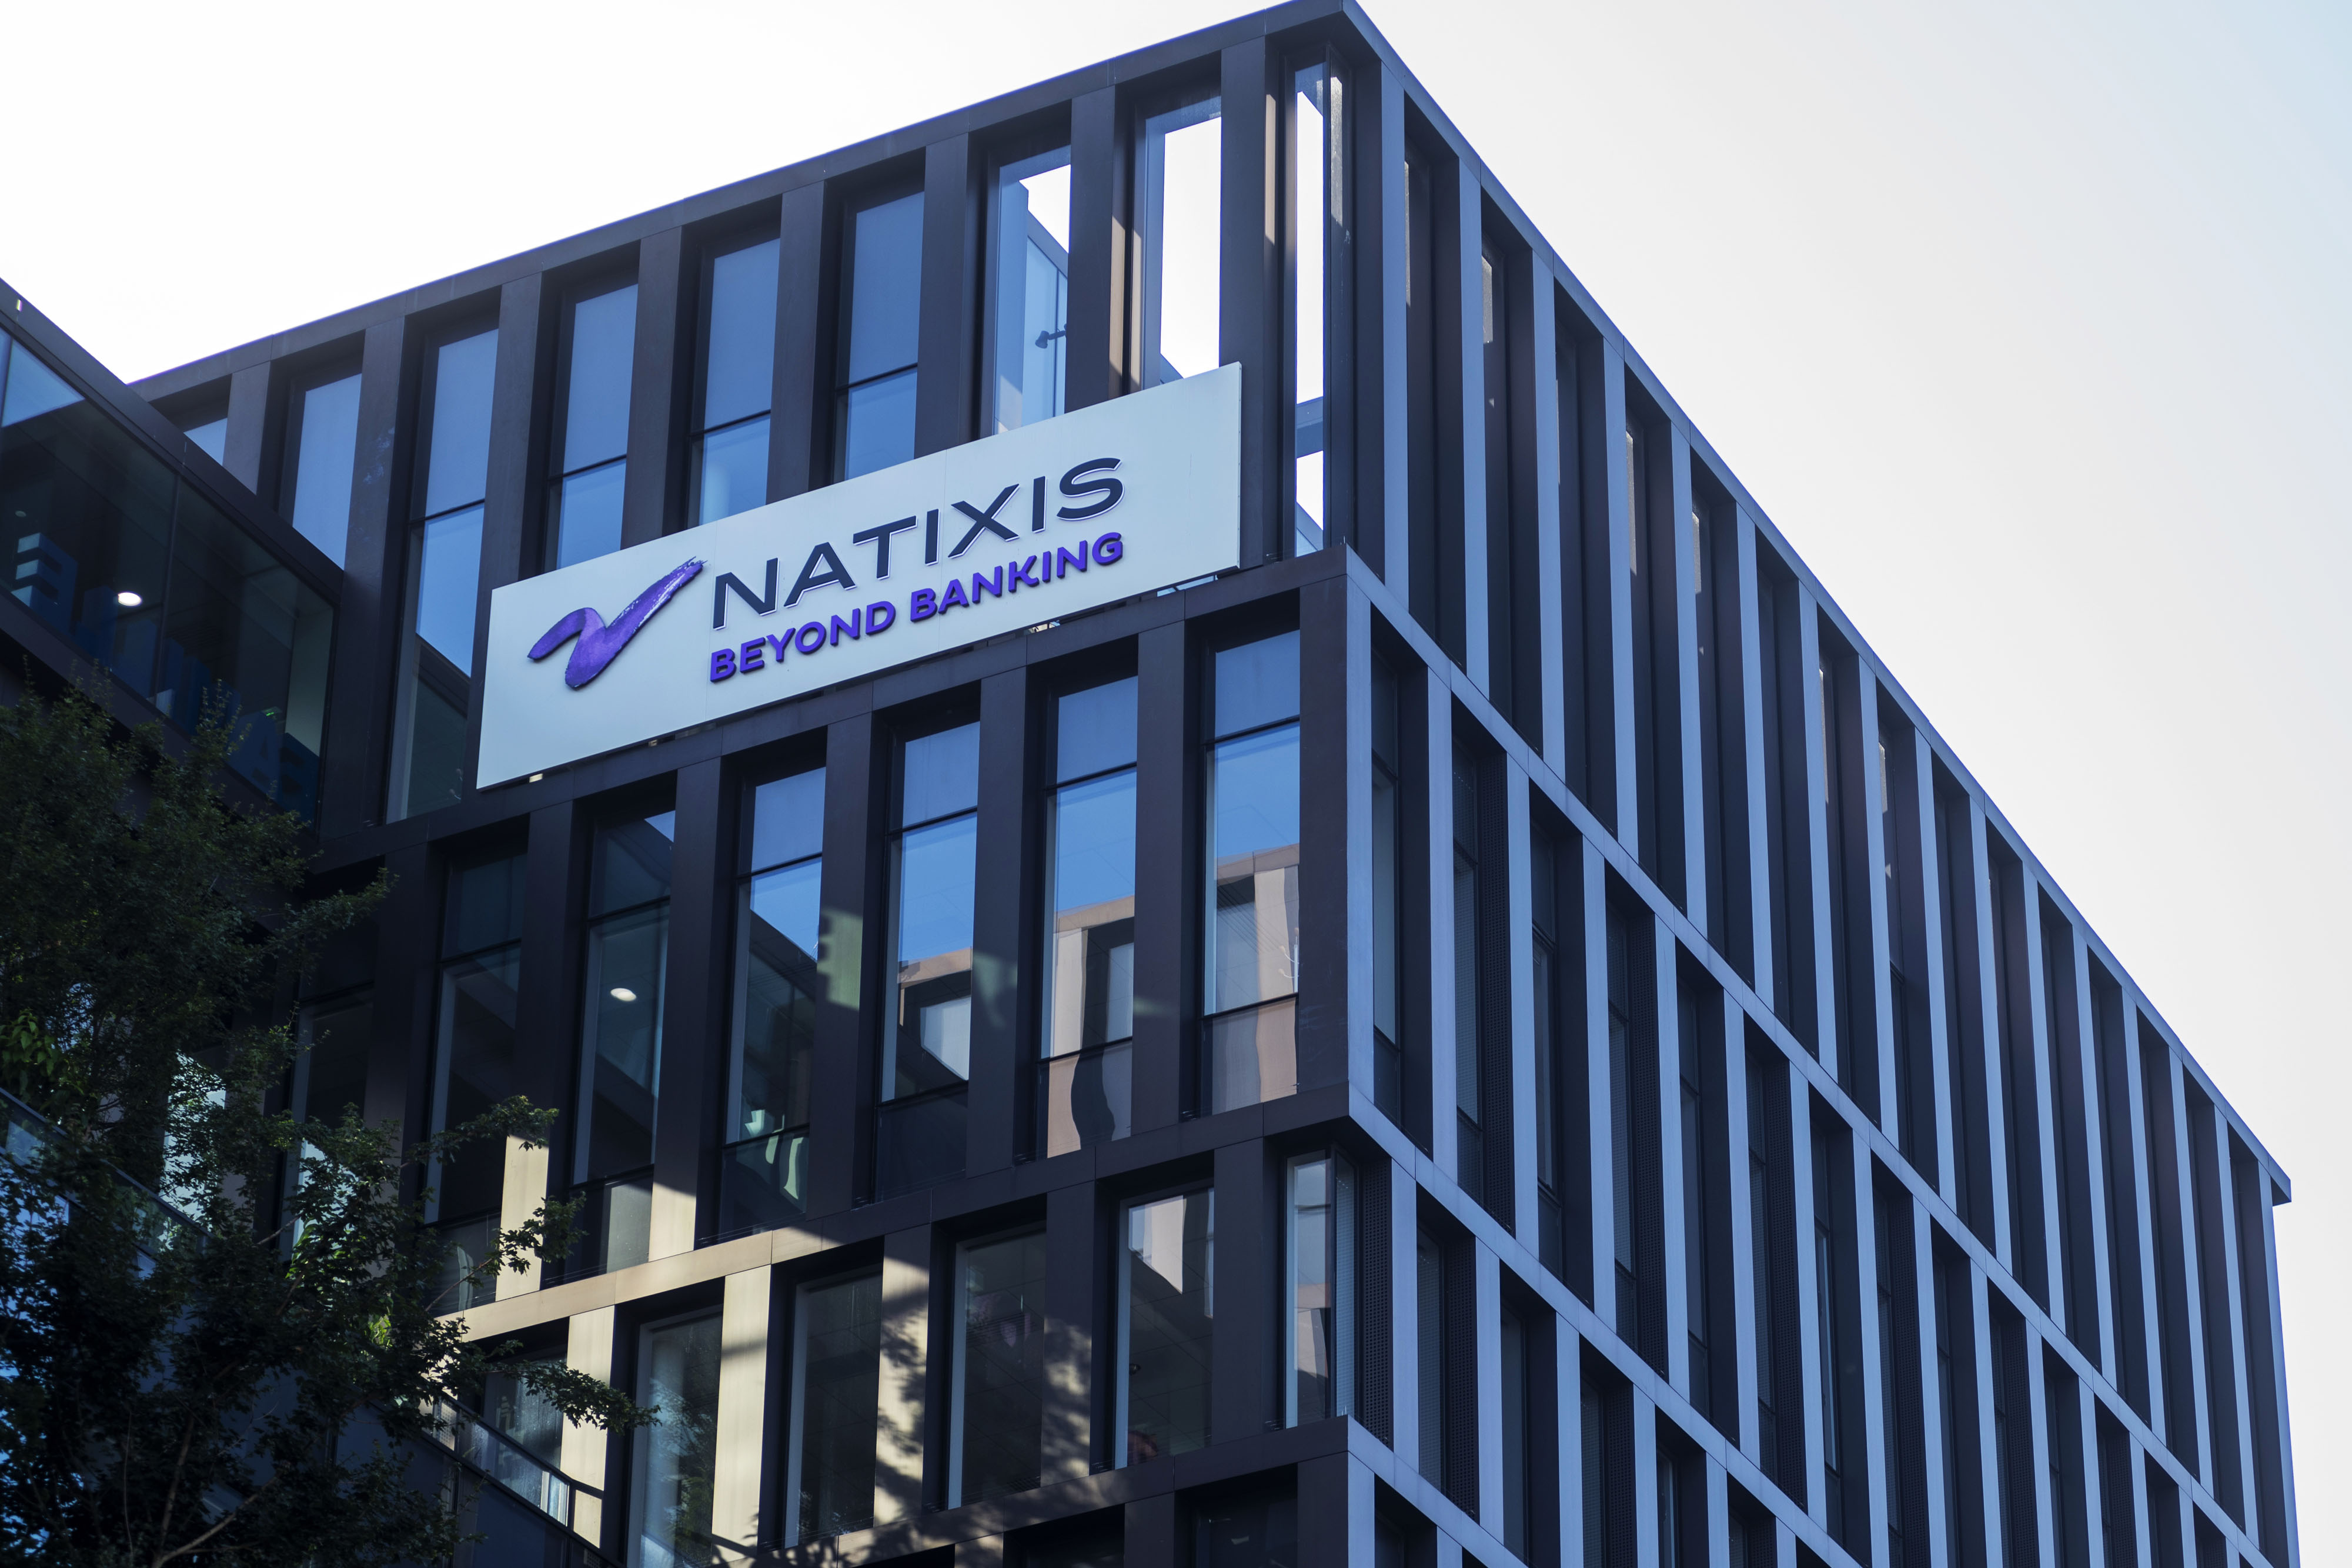 The Natixis SA logo sits on a sign outside the company's headquarters in Paris.